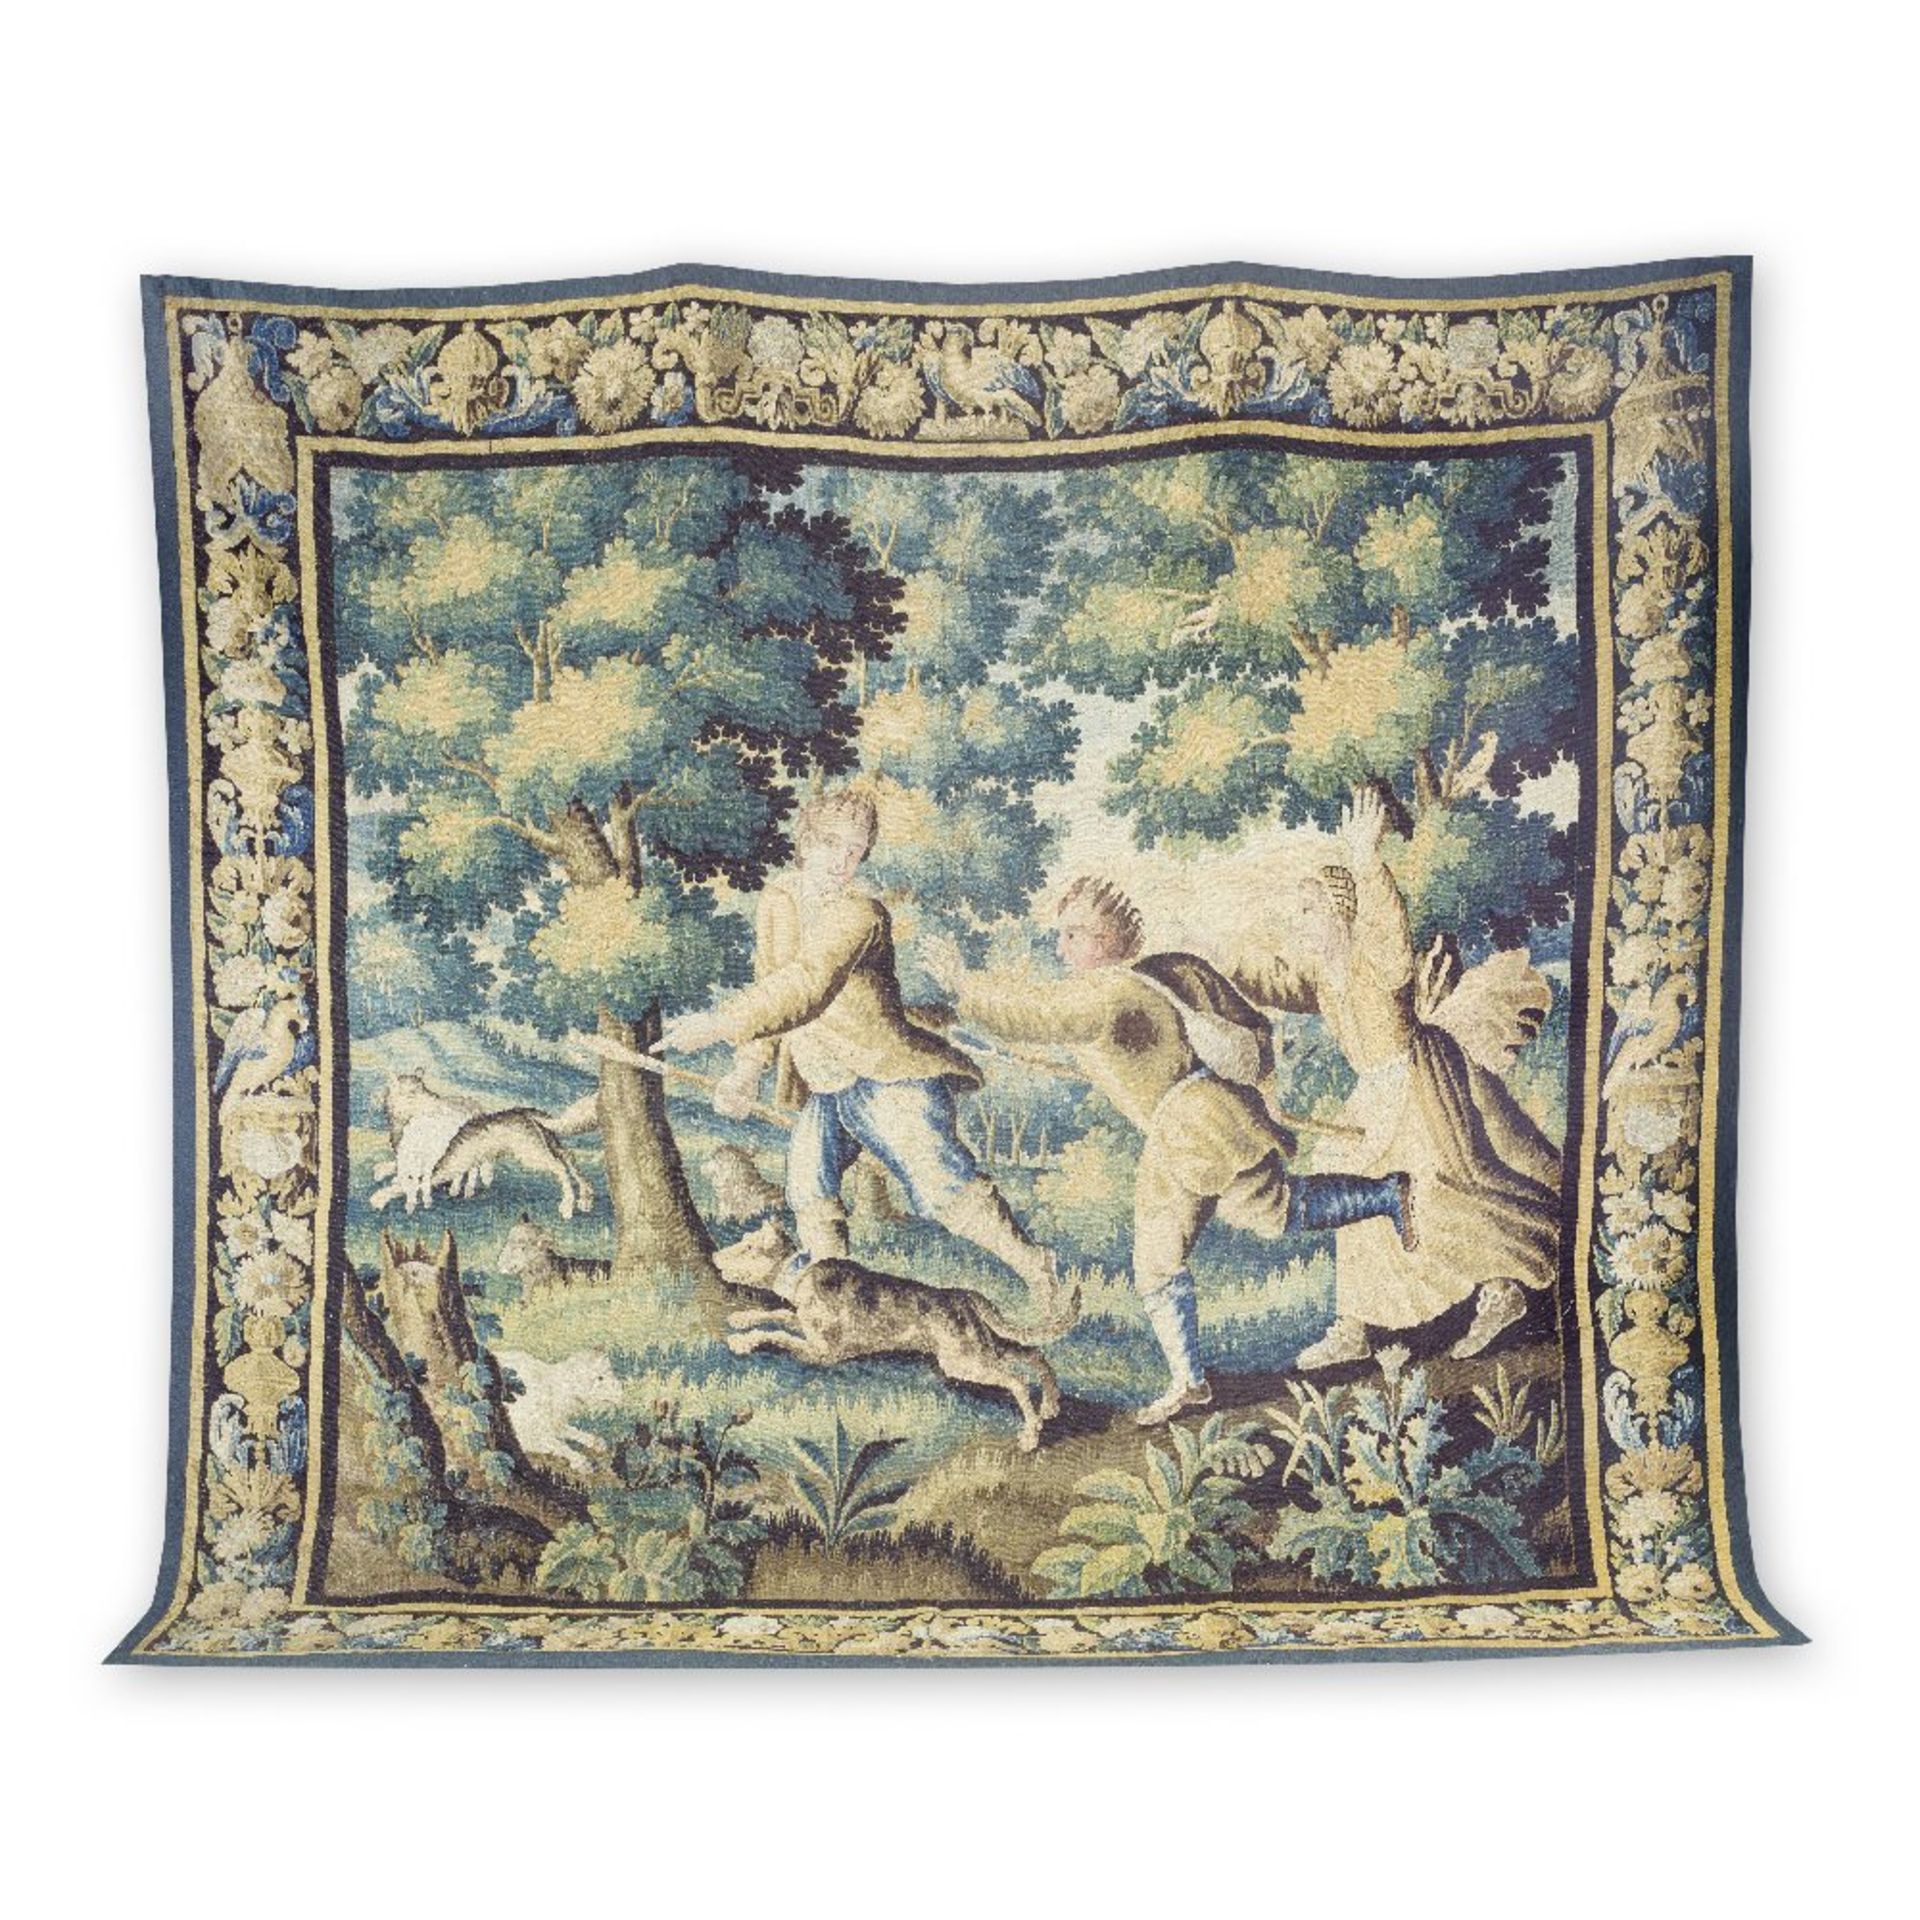 An Aubusson tapestry Late 17th century